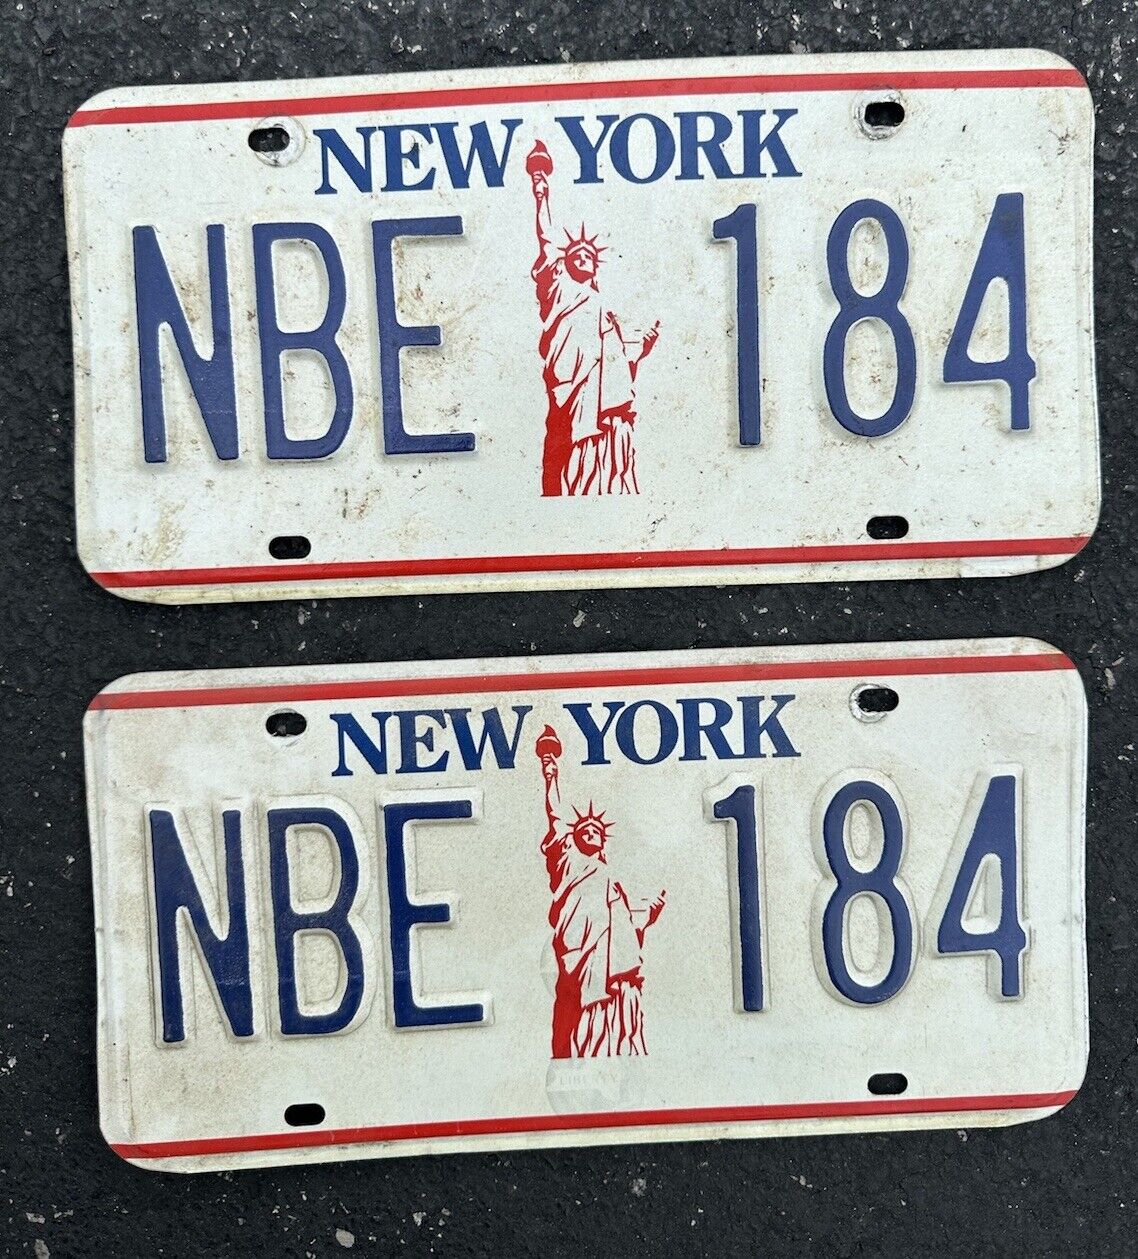 1980s/1990s New York STATUE OF LIBERTY License Plate PAIR  # NBE 184